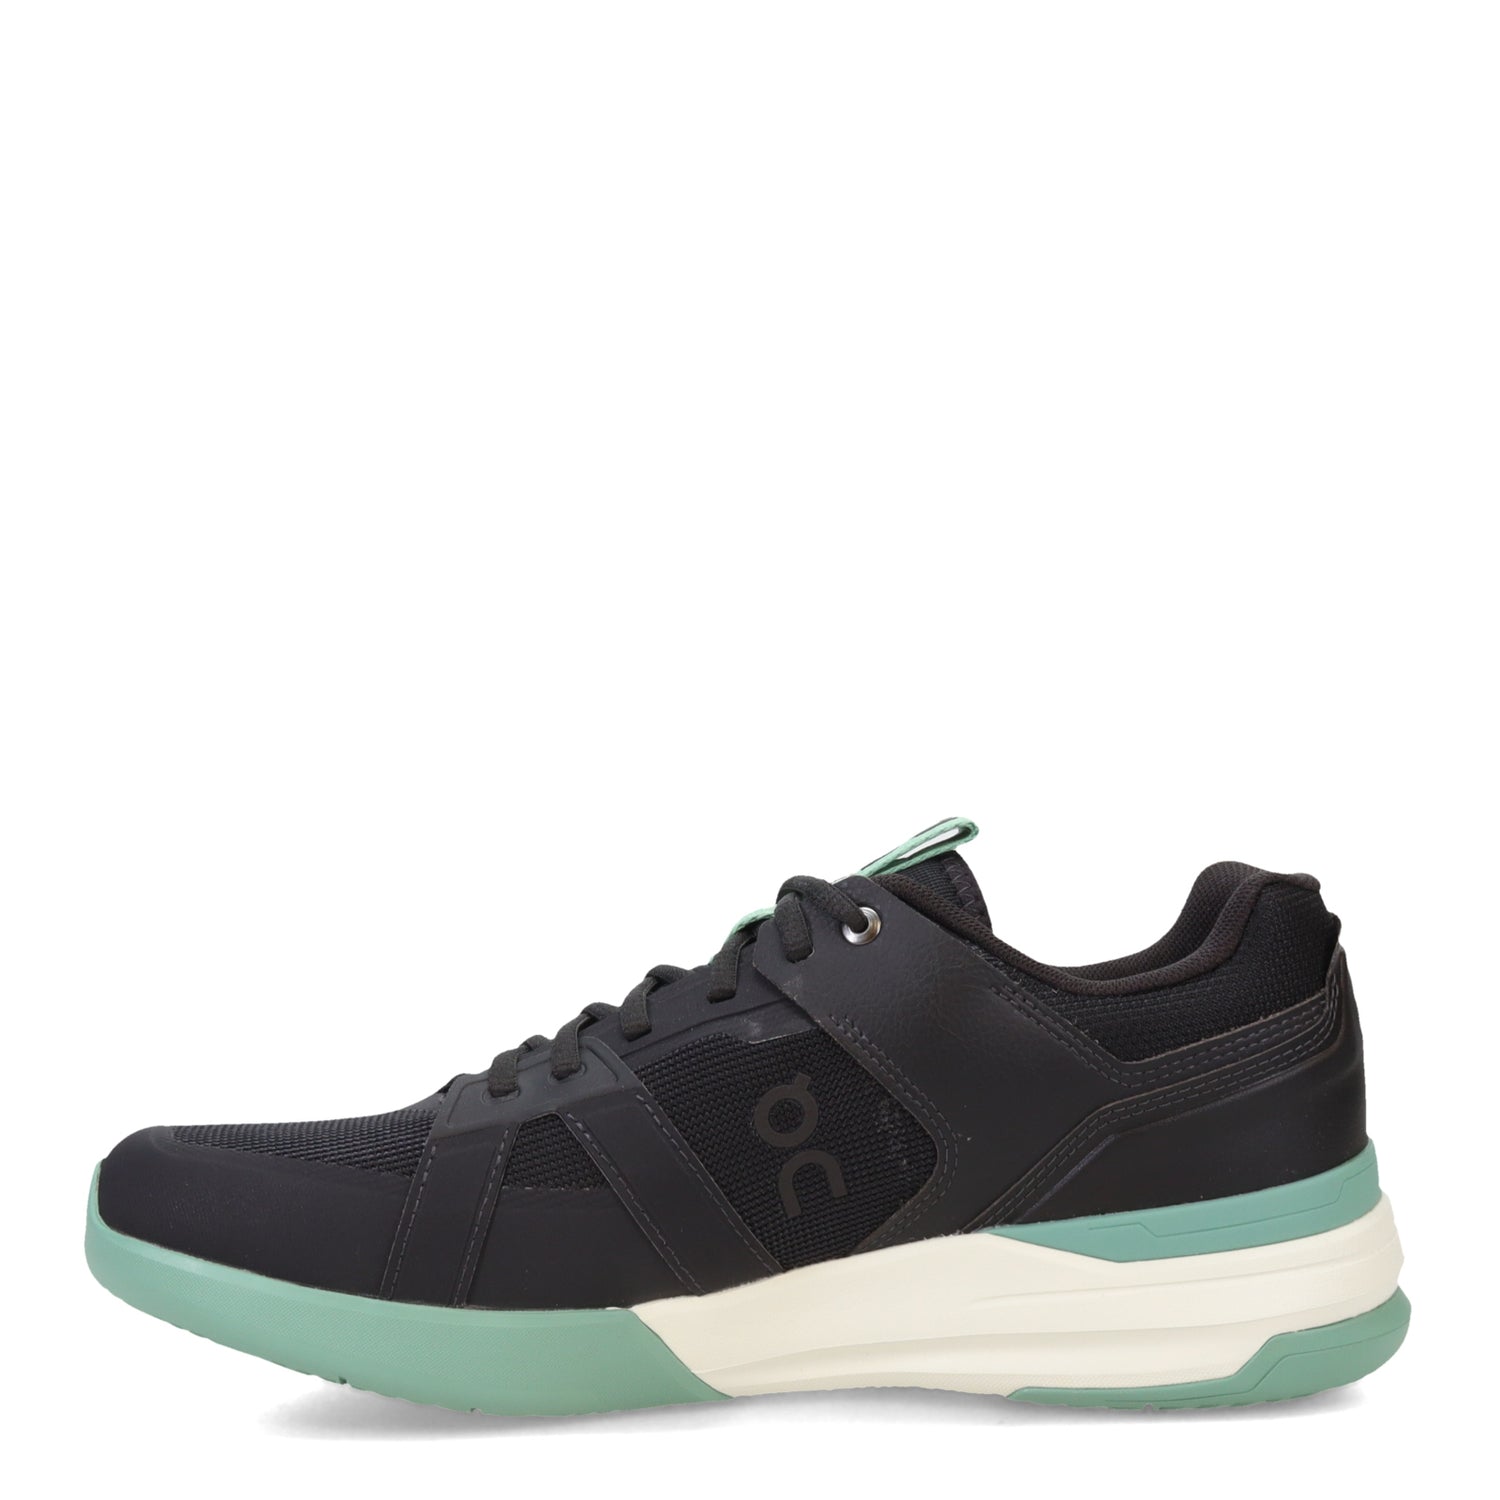 Peltz Shoes  Women's On Running The Roger Clubhouse Pro Tennis Shoe Black/Green 3WD30051092